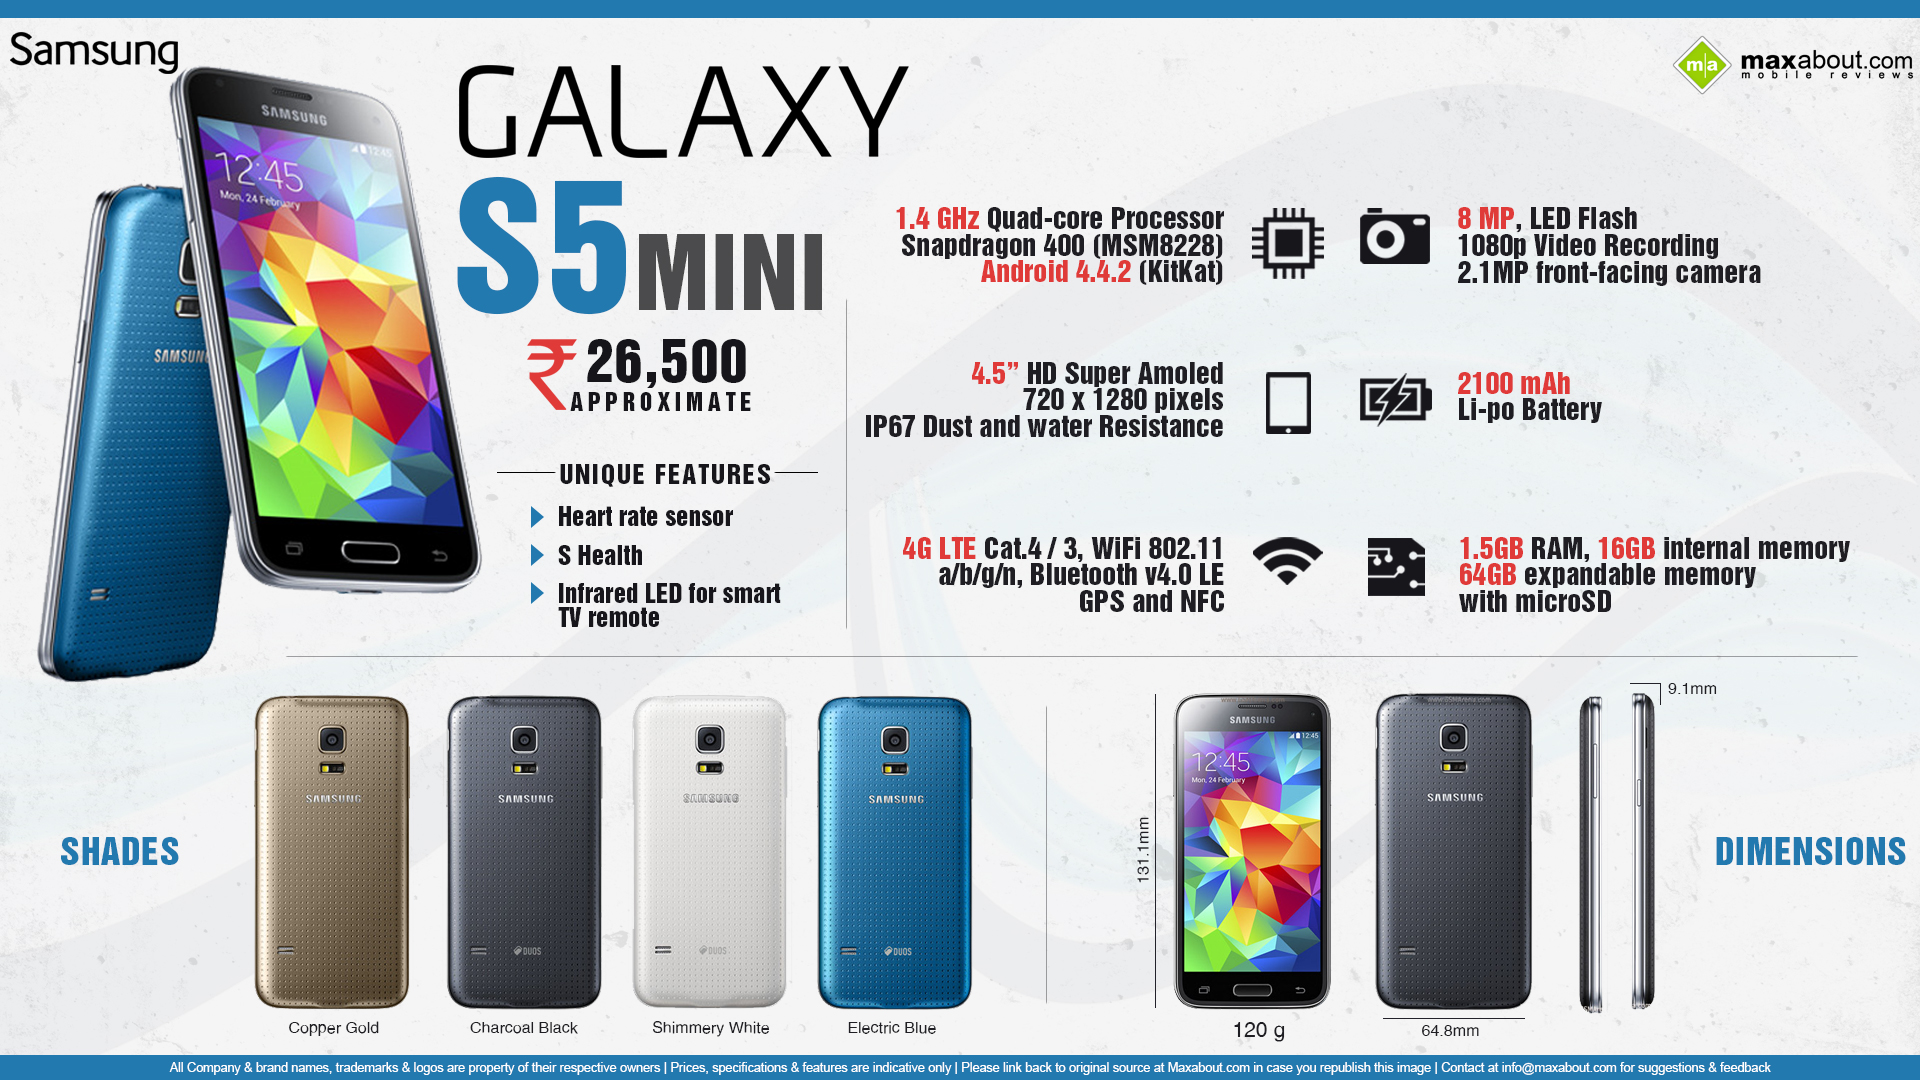 Quick Facts About Samsung Galaxy S5 Mini